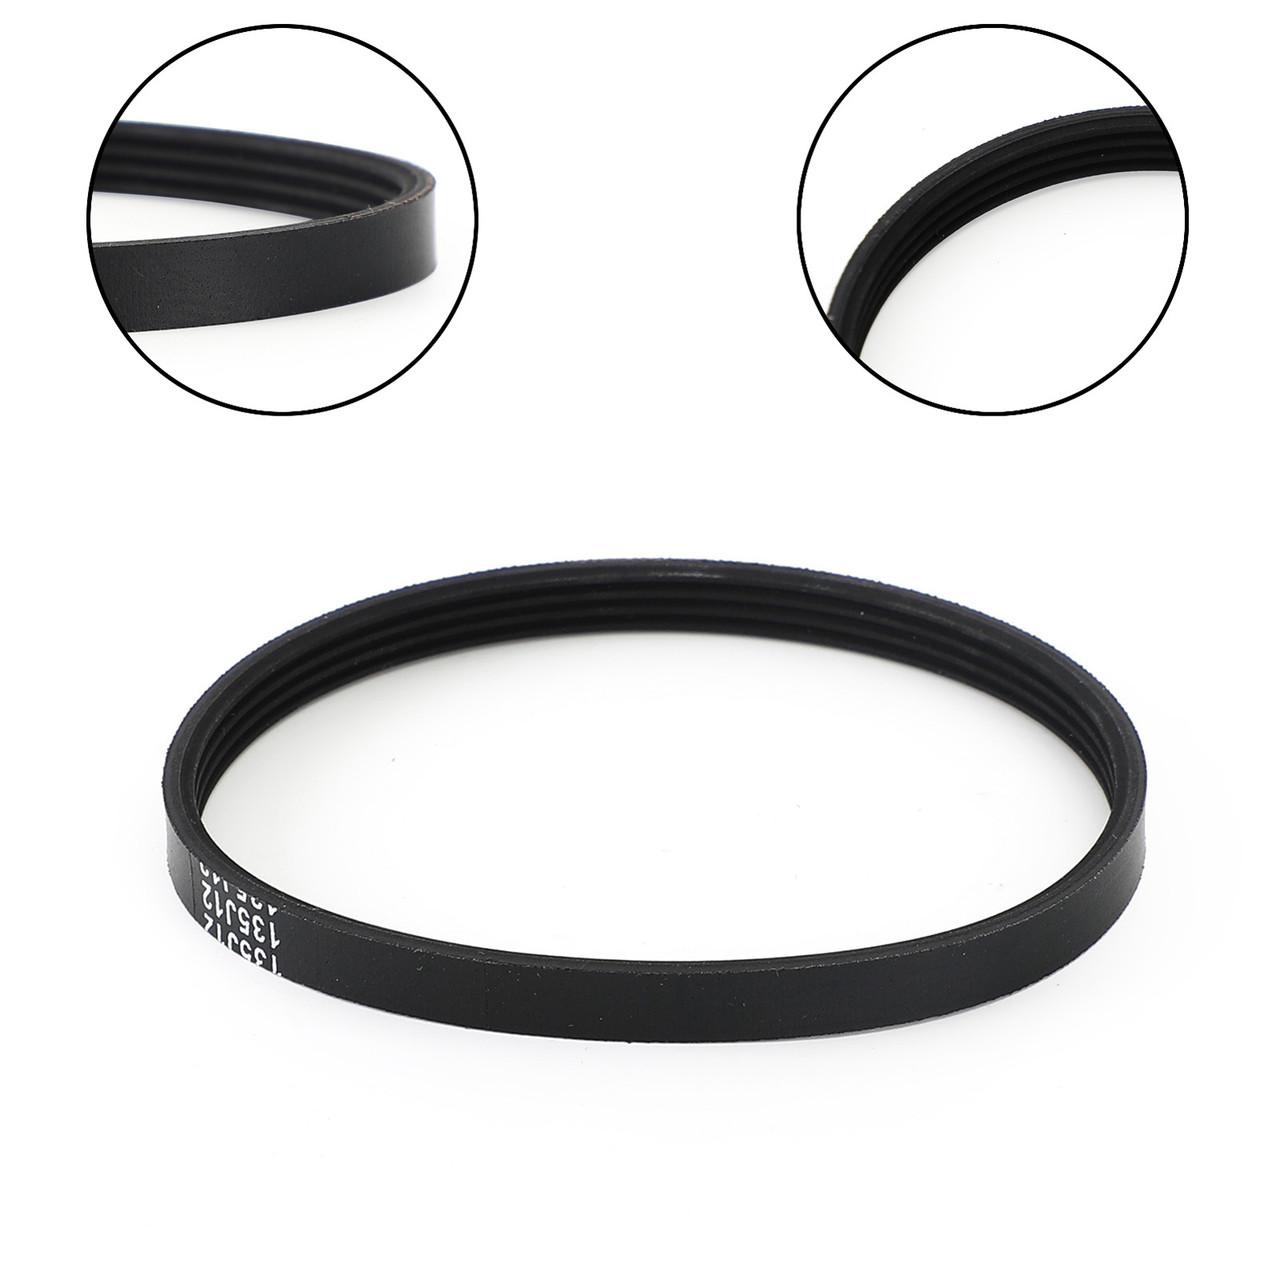 1Pcs Rubber Drive Belt For Sears Craftsman Band Saw Model 124.21400 Band Saw